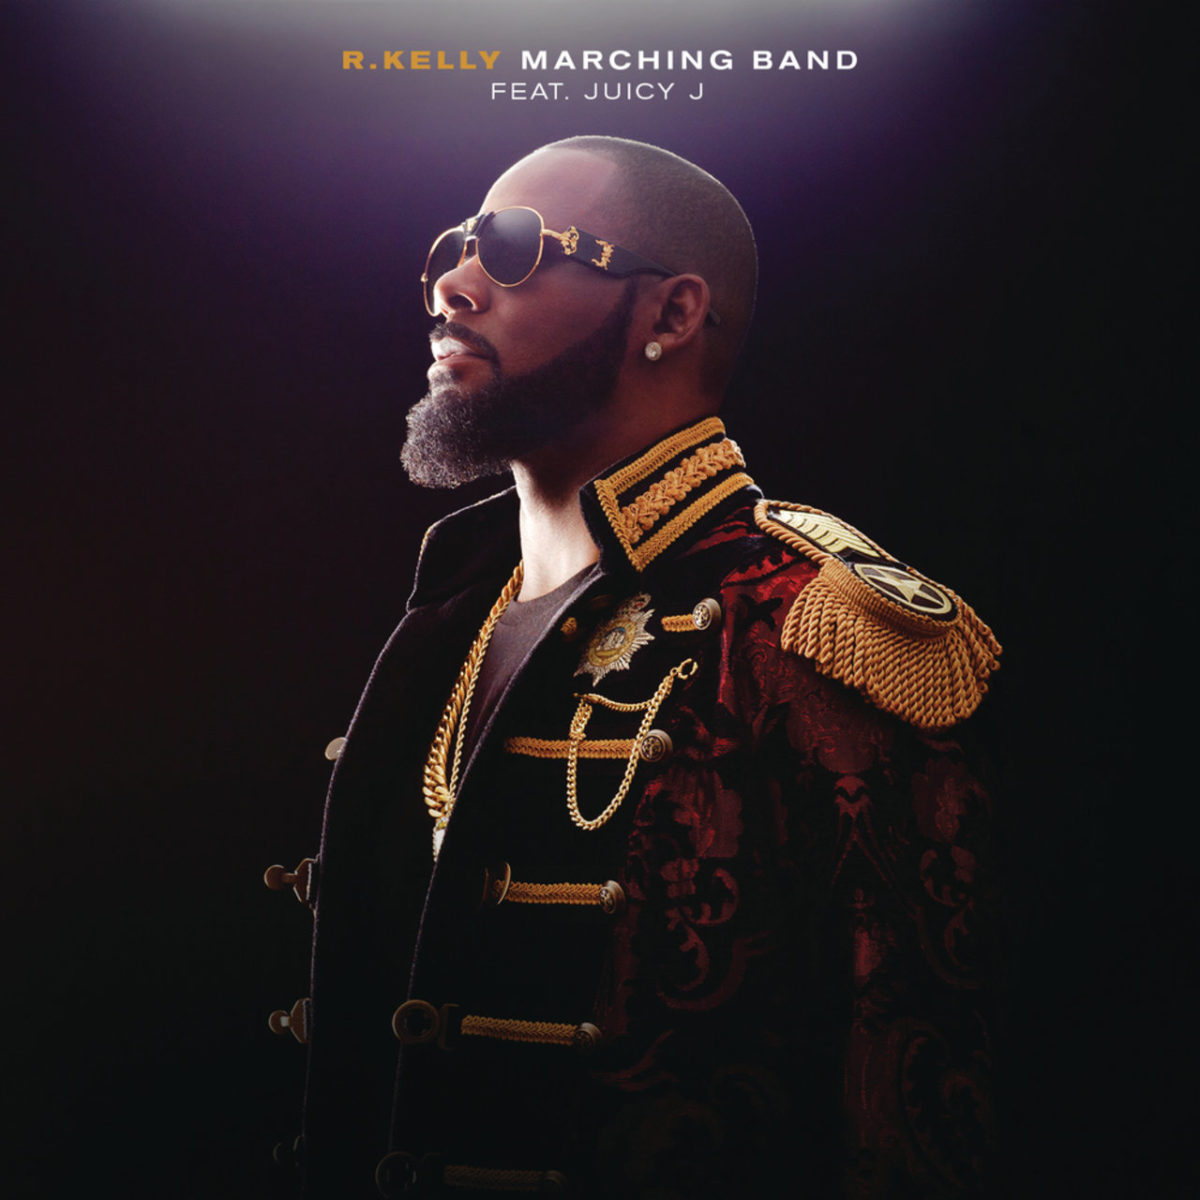 R. Kelly - Marching Band (ft. Juicy J) (Cover)